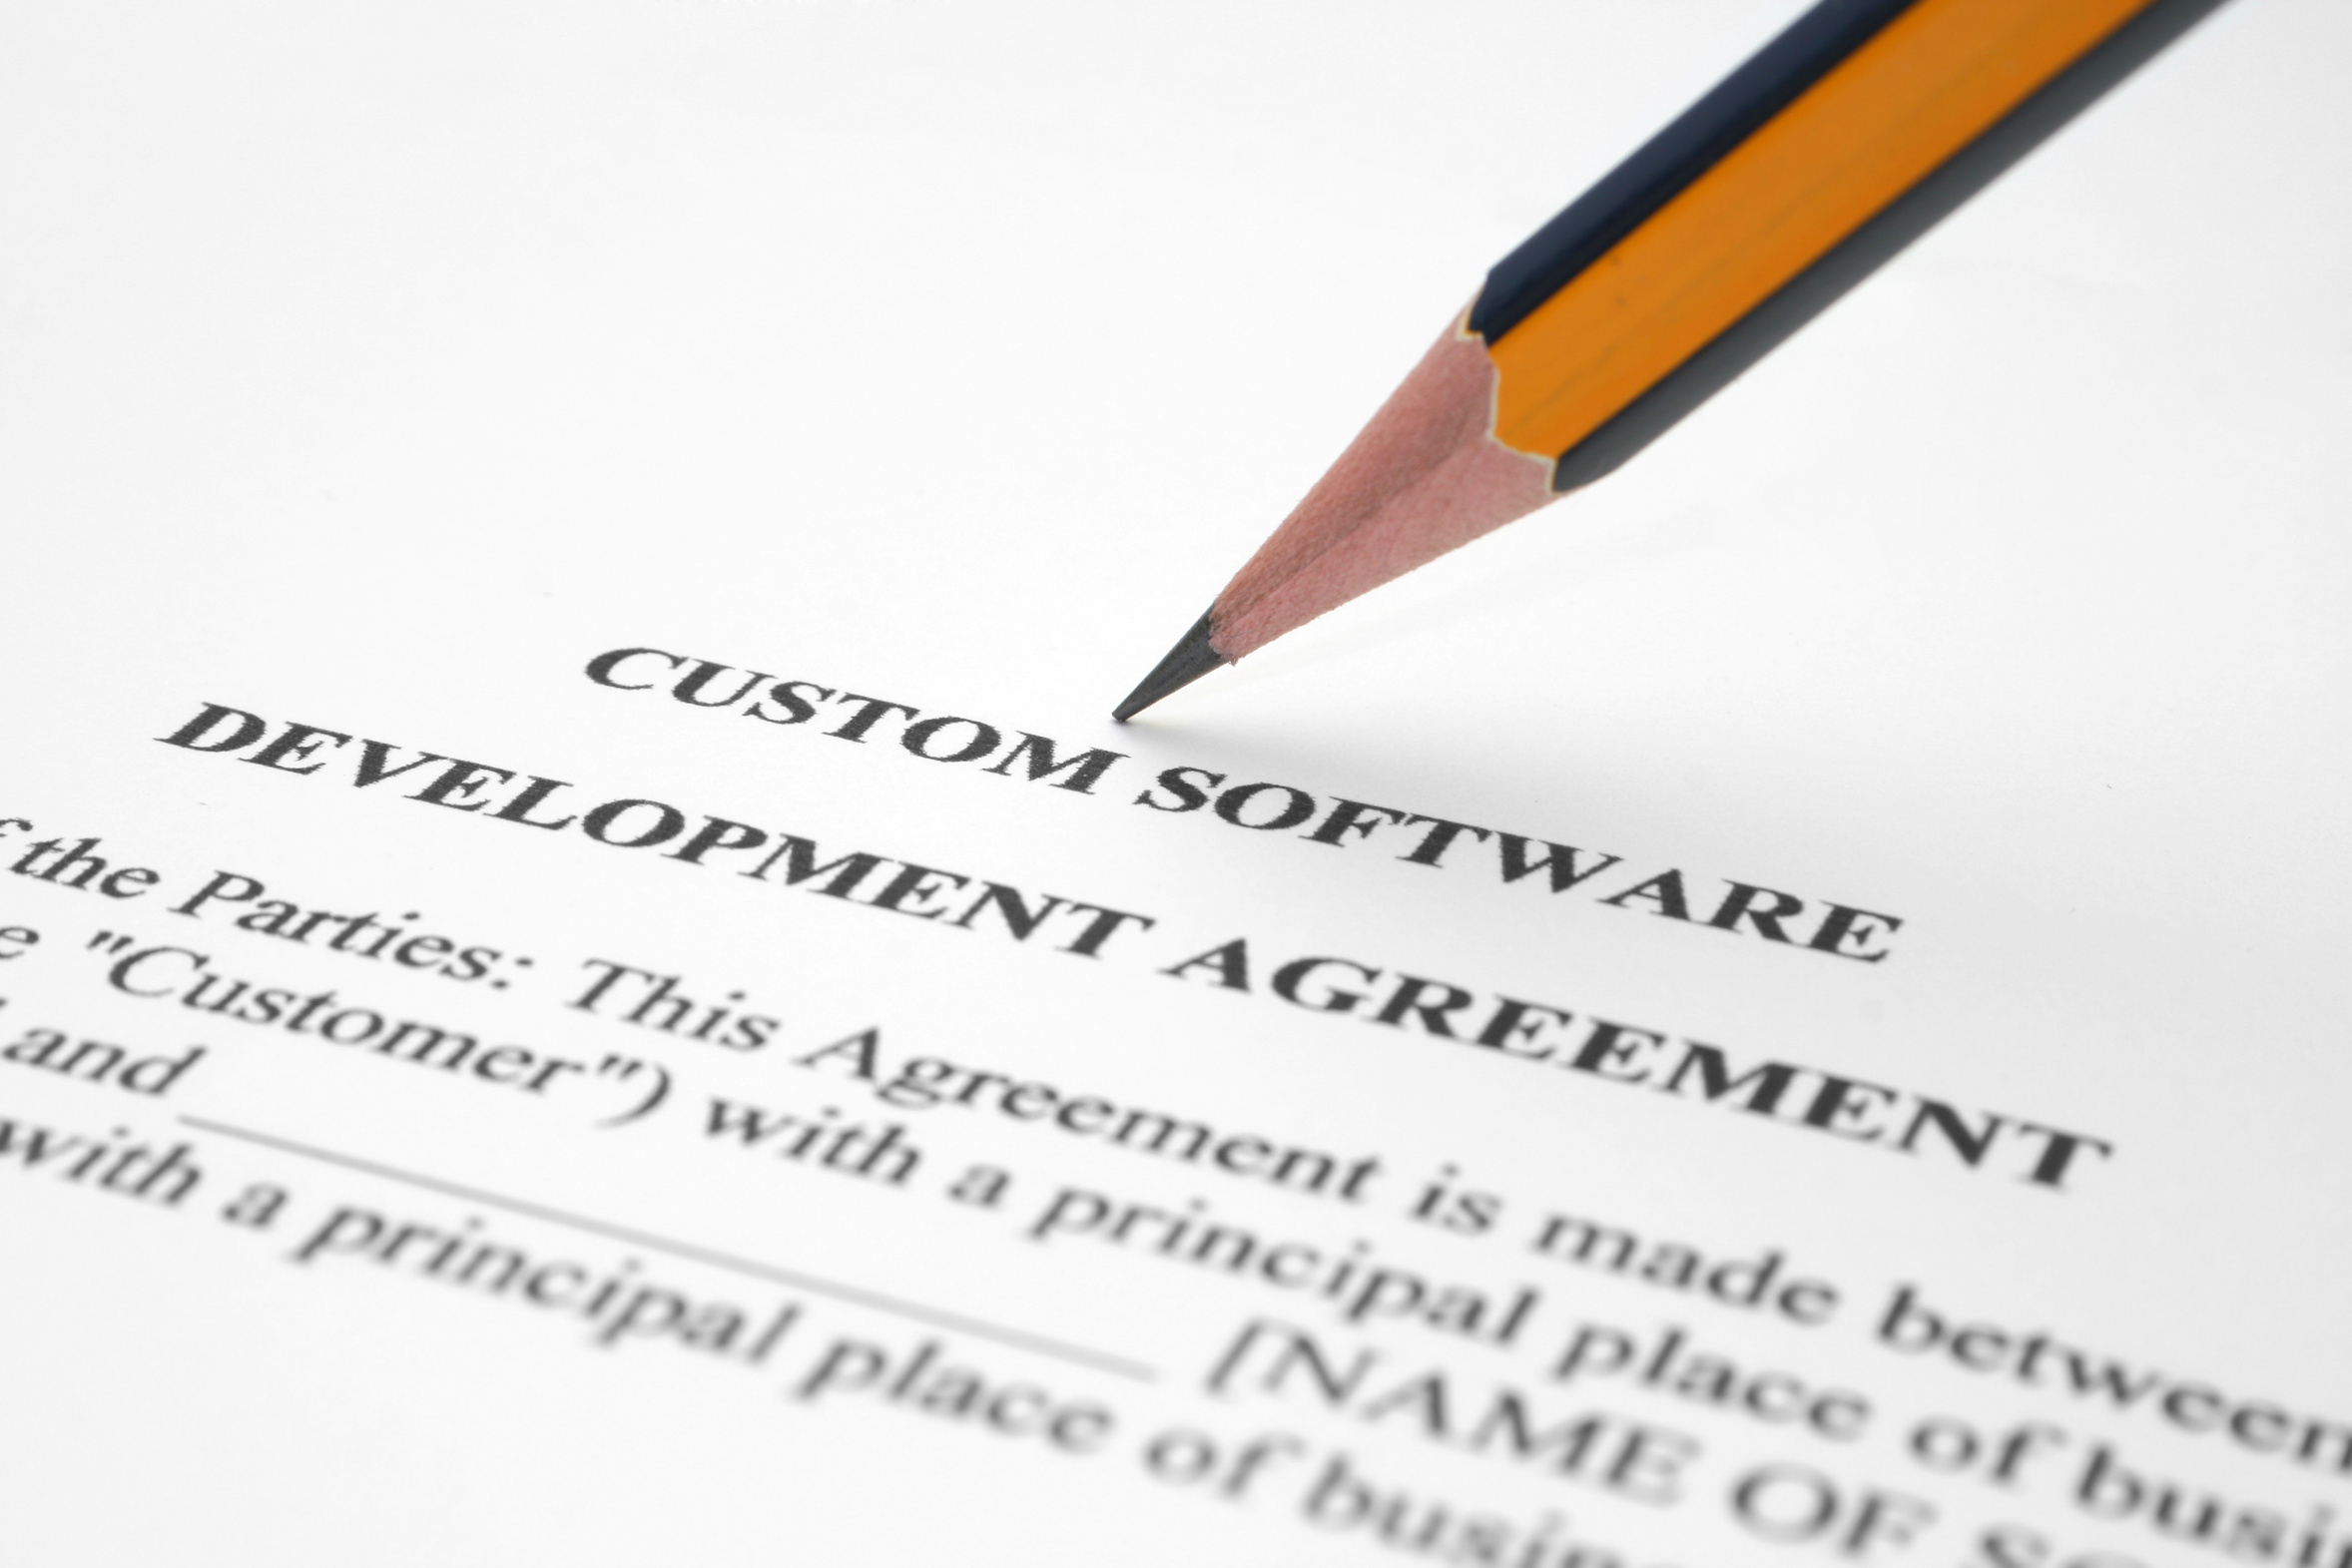 Escrow Agreement Uk Software Escrow Does Not Fit With Cloud How To Work Round This